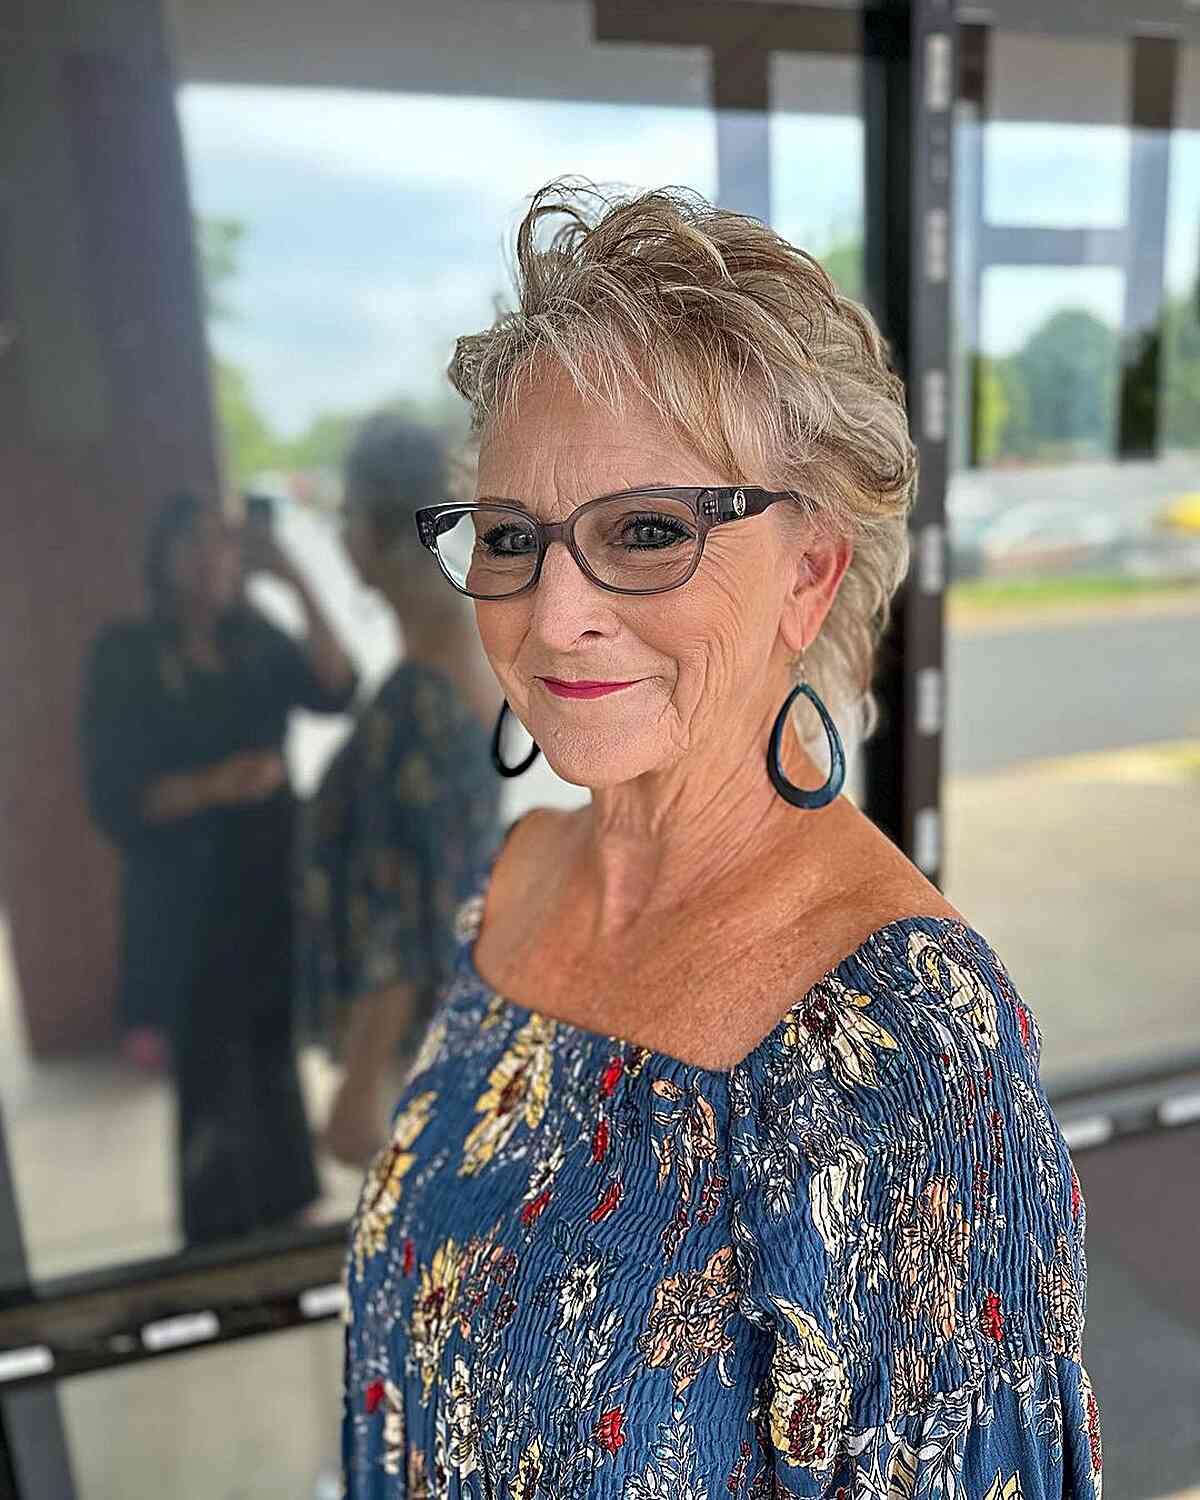 Short Feathered Cut for Thin Hair for 60-year-olds with Glasses